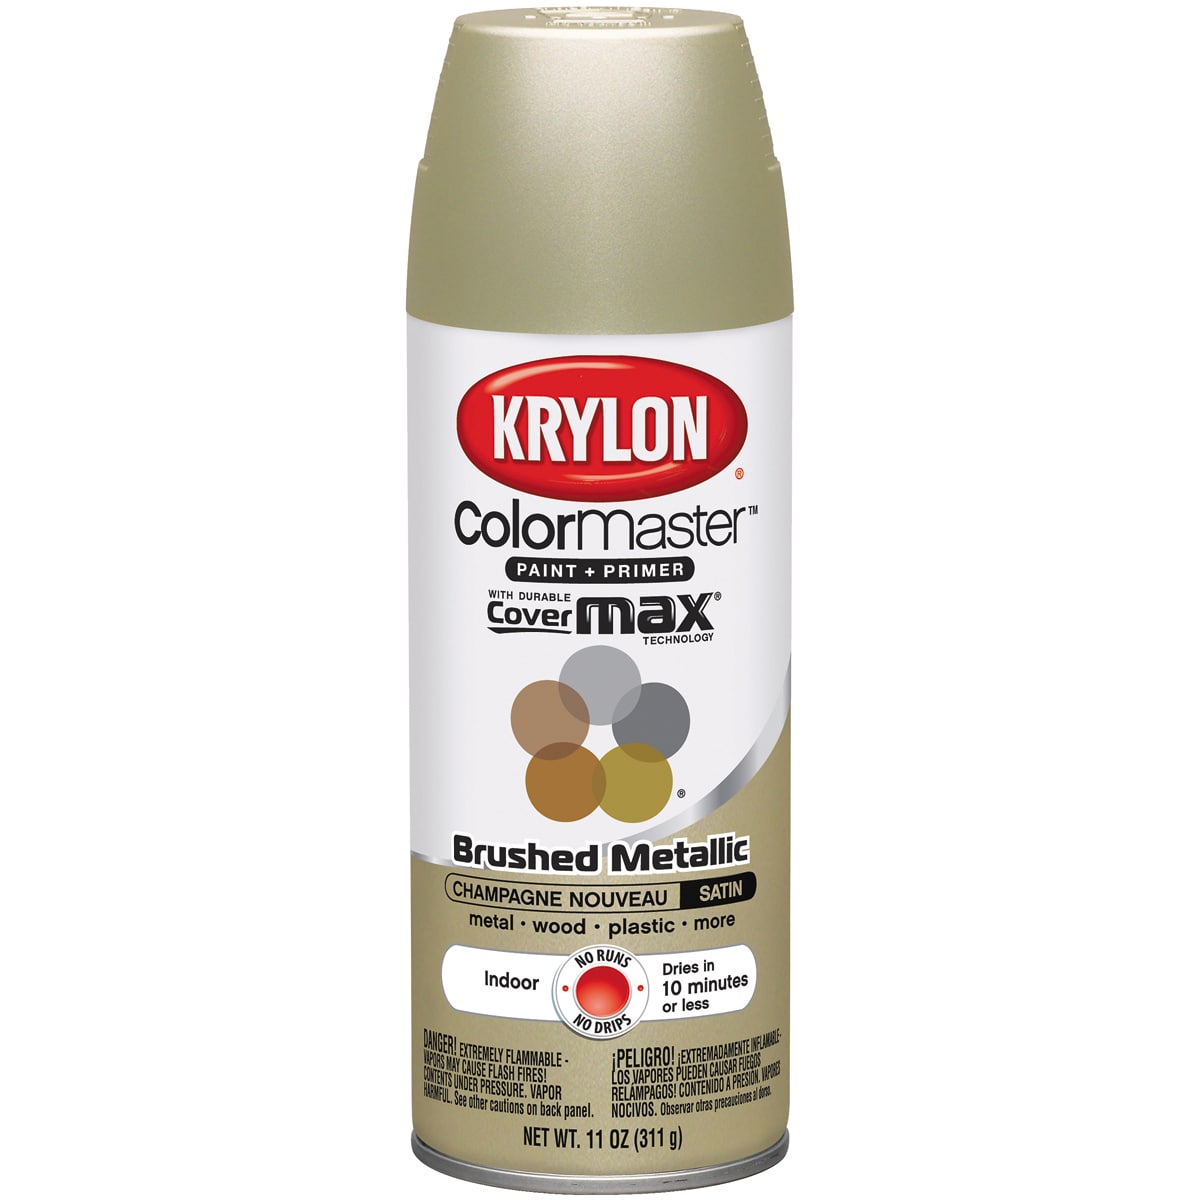 Colormaster Indoor/Outdoor Aerosol Paint 12oz-Satin Champagne Nouveau - image 2 of 2